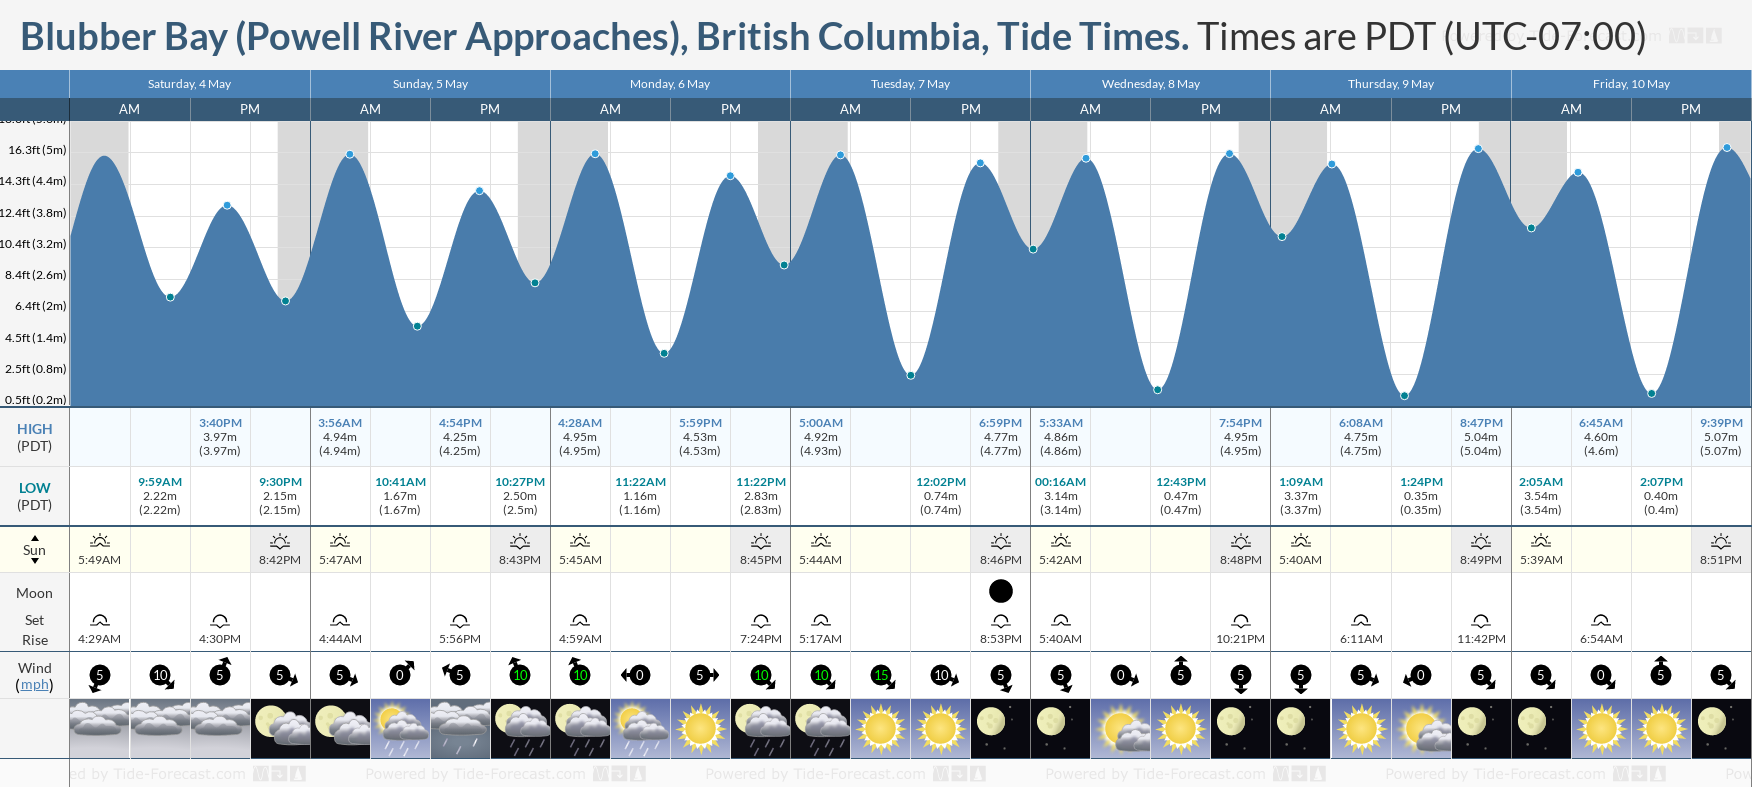 Blubber Bay (Powell River Approaches), British Columbia Tide Chart including high and low tide tide times for the next 7 days